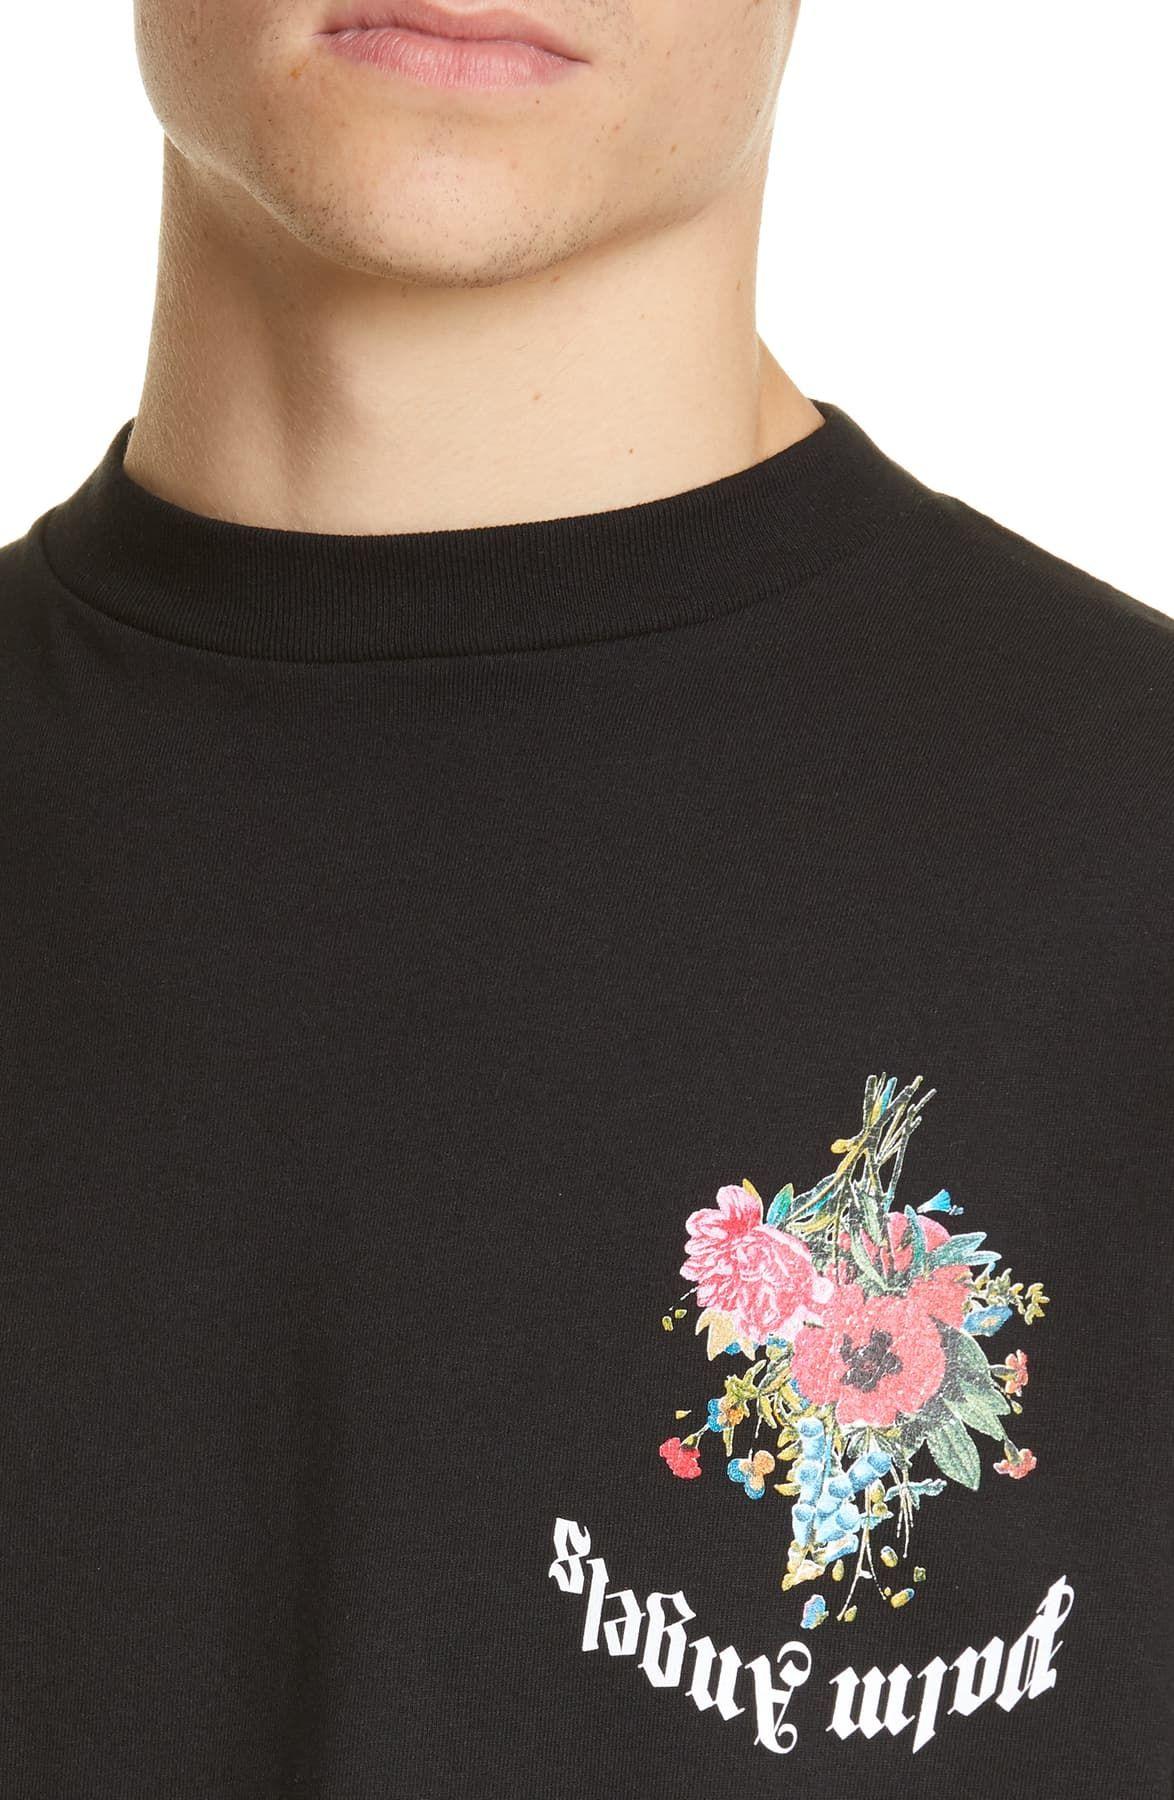 Palm Angels Flowers Graphic T-shirt in Black for Men - Lyst